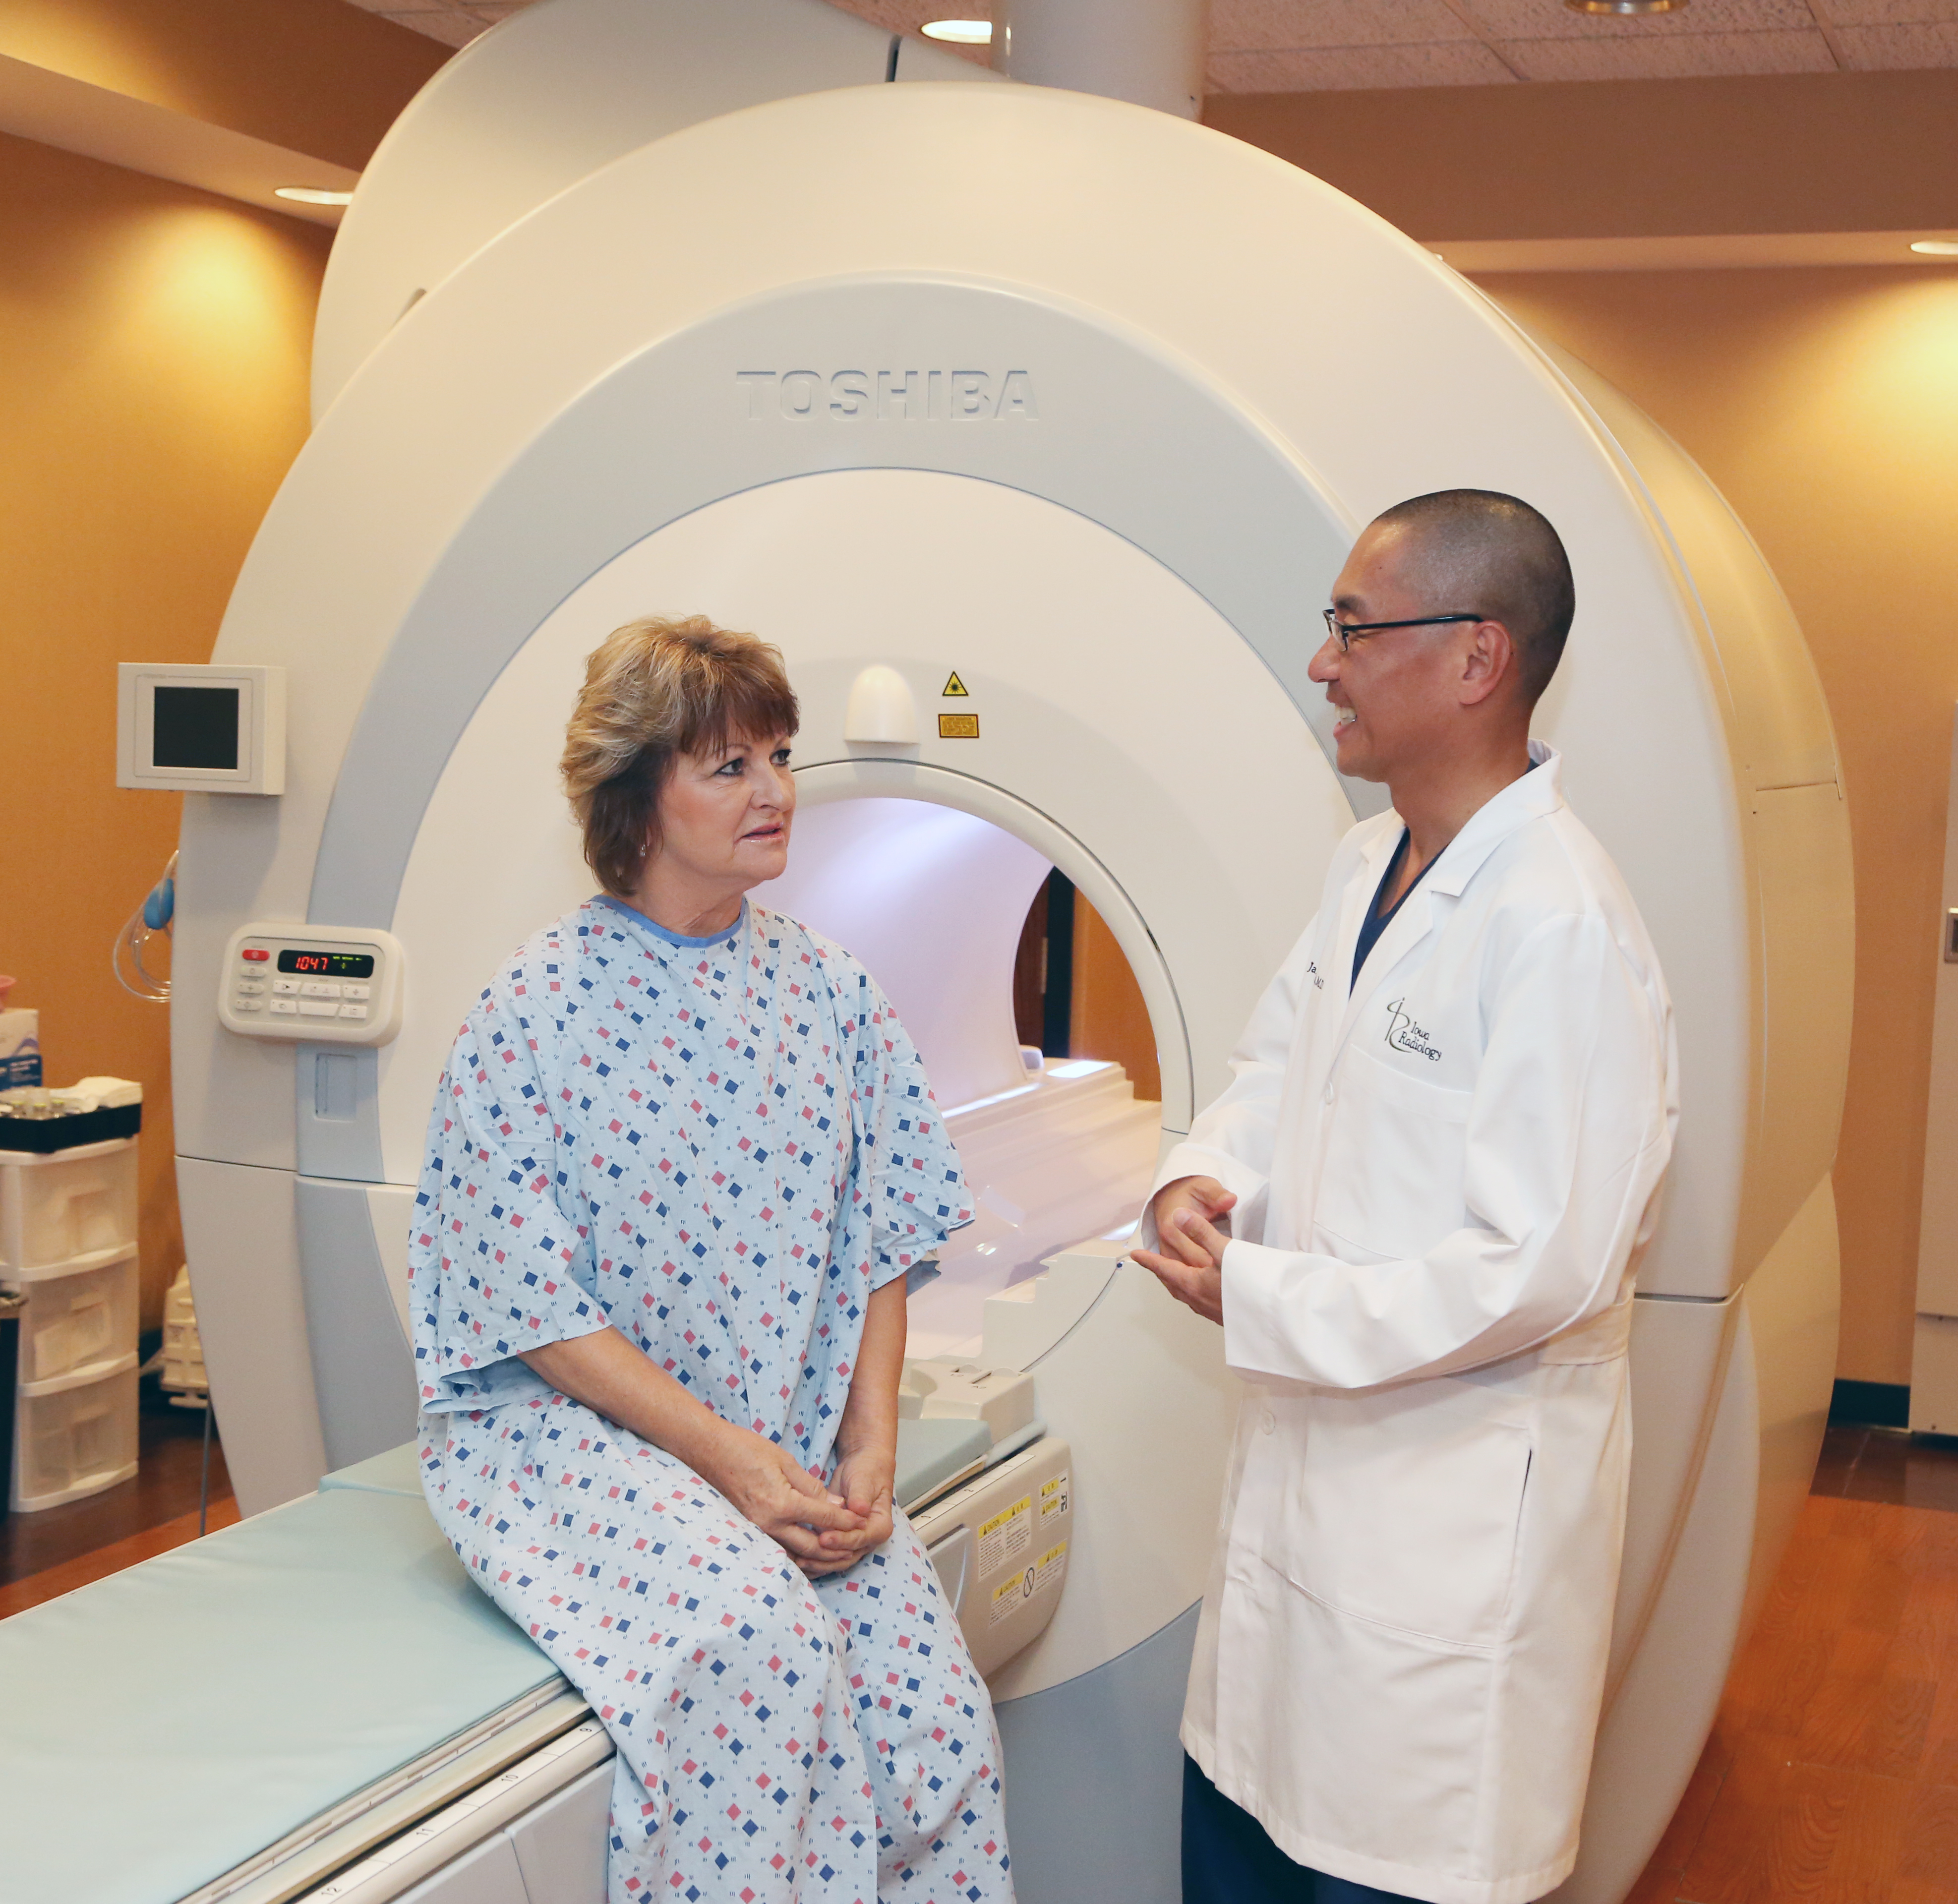 How Should I Prepare for an MRI?